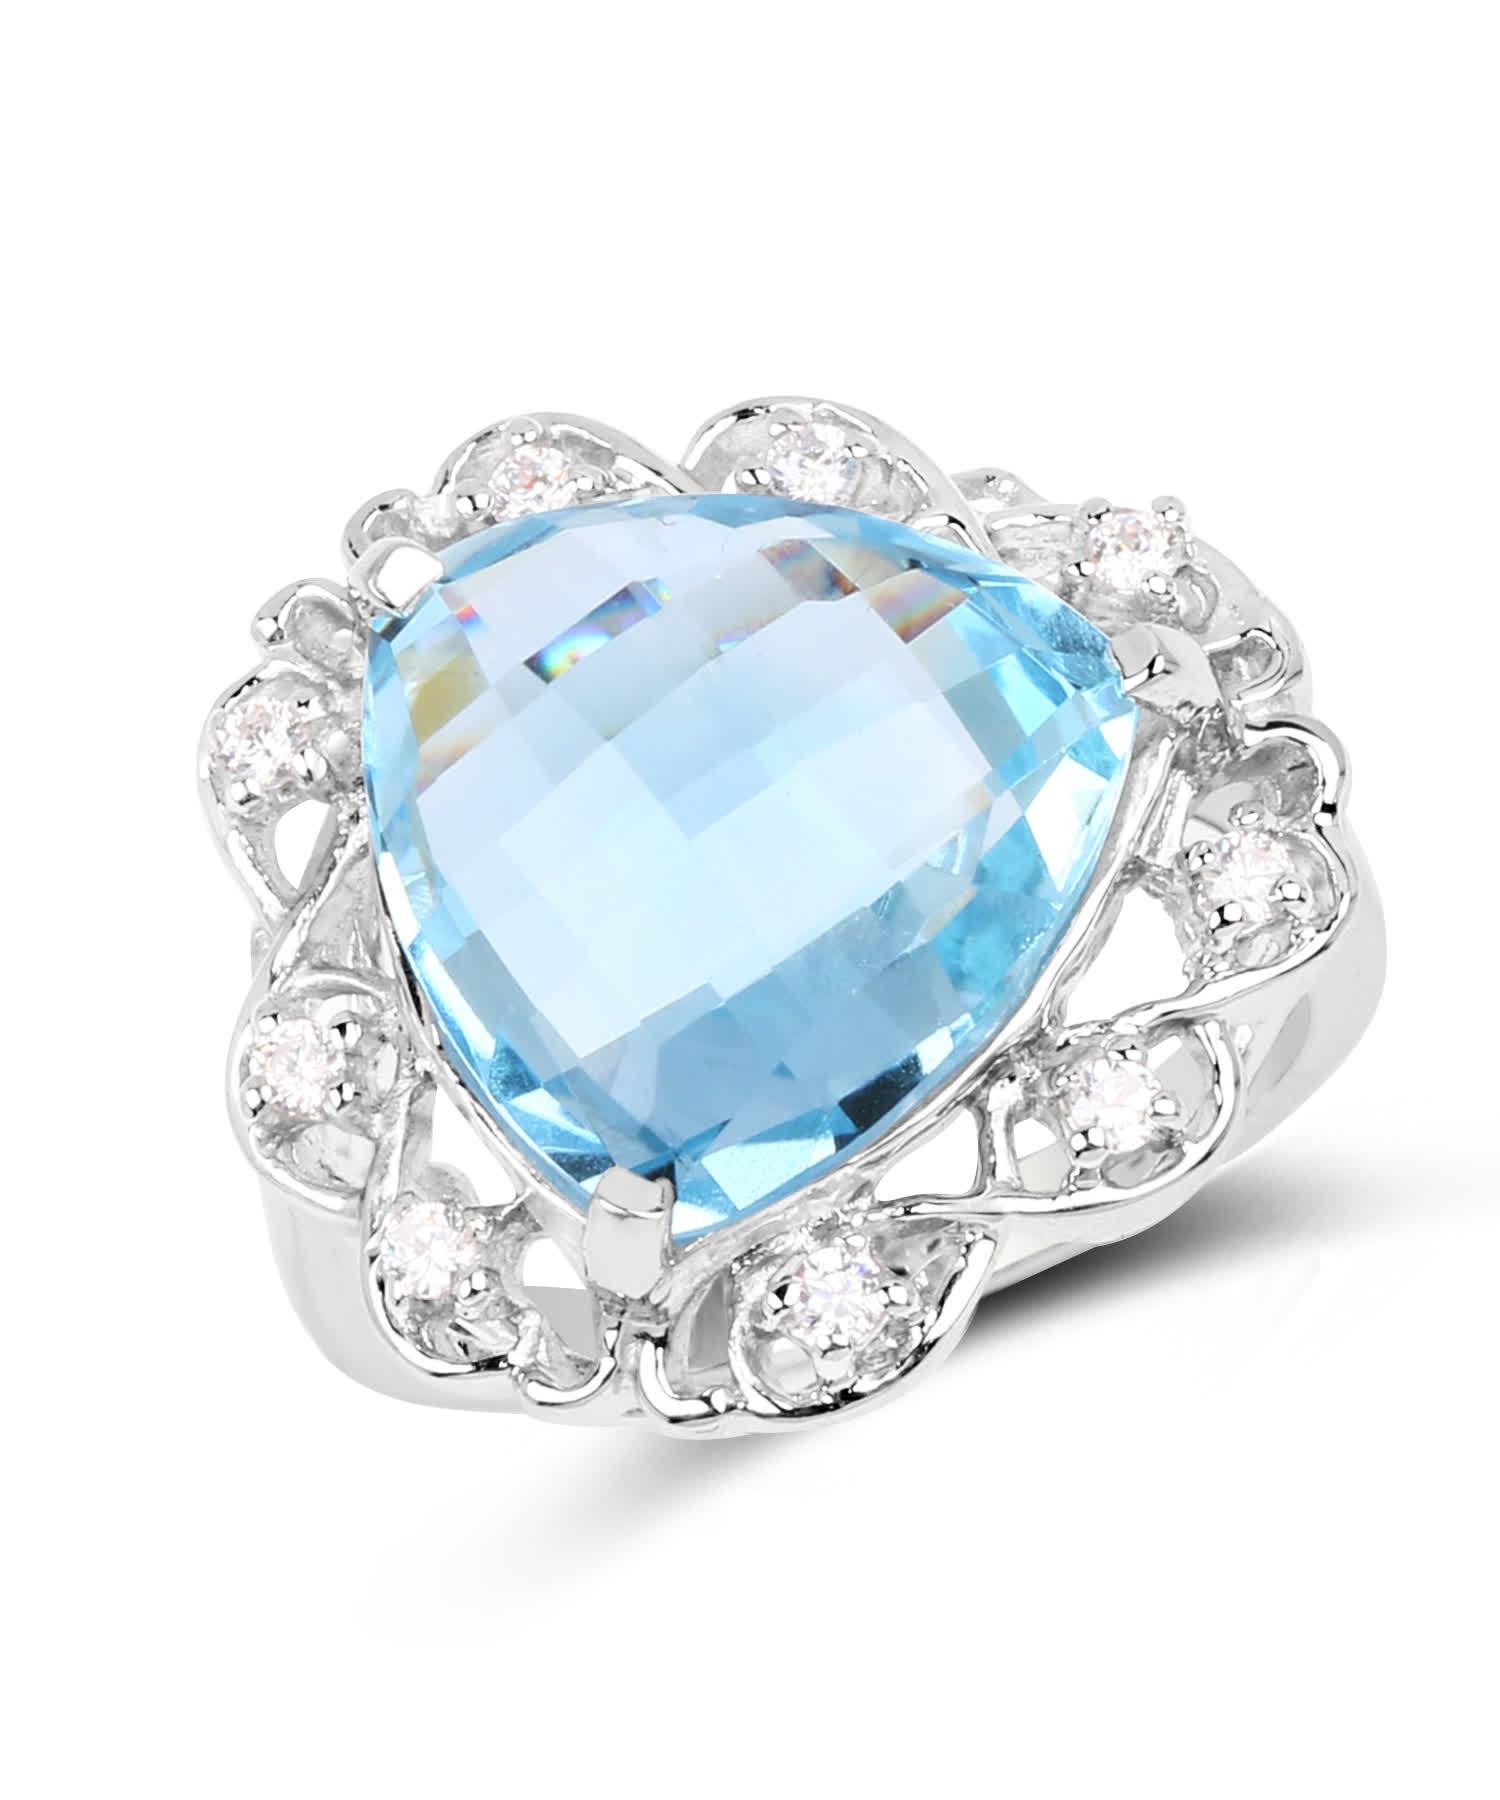 11.01ctw Natural Swiss Blue Topaz and Zircon Rhodium Plated 925 Sterling Silver Triangle Cocktail Ring View 1